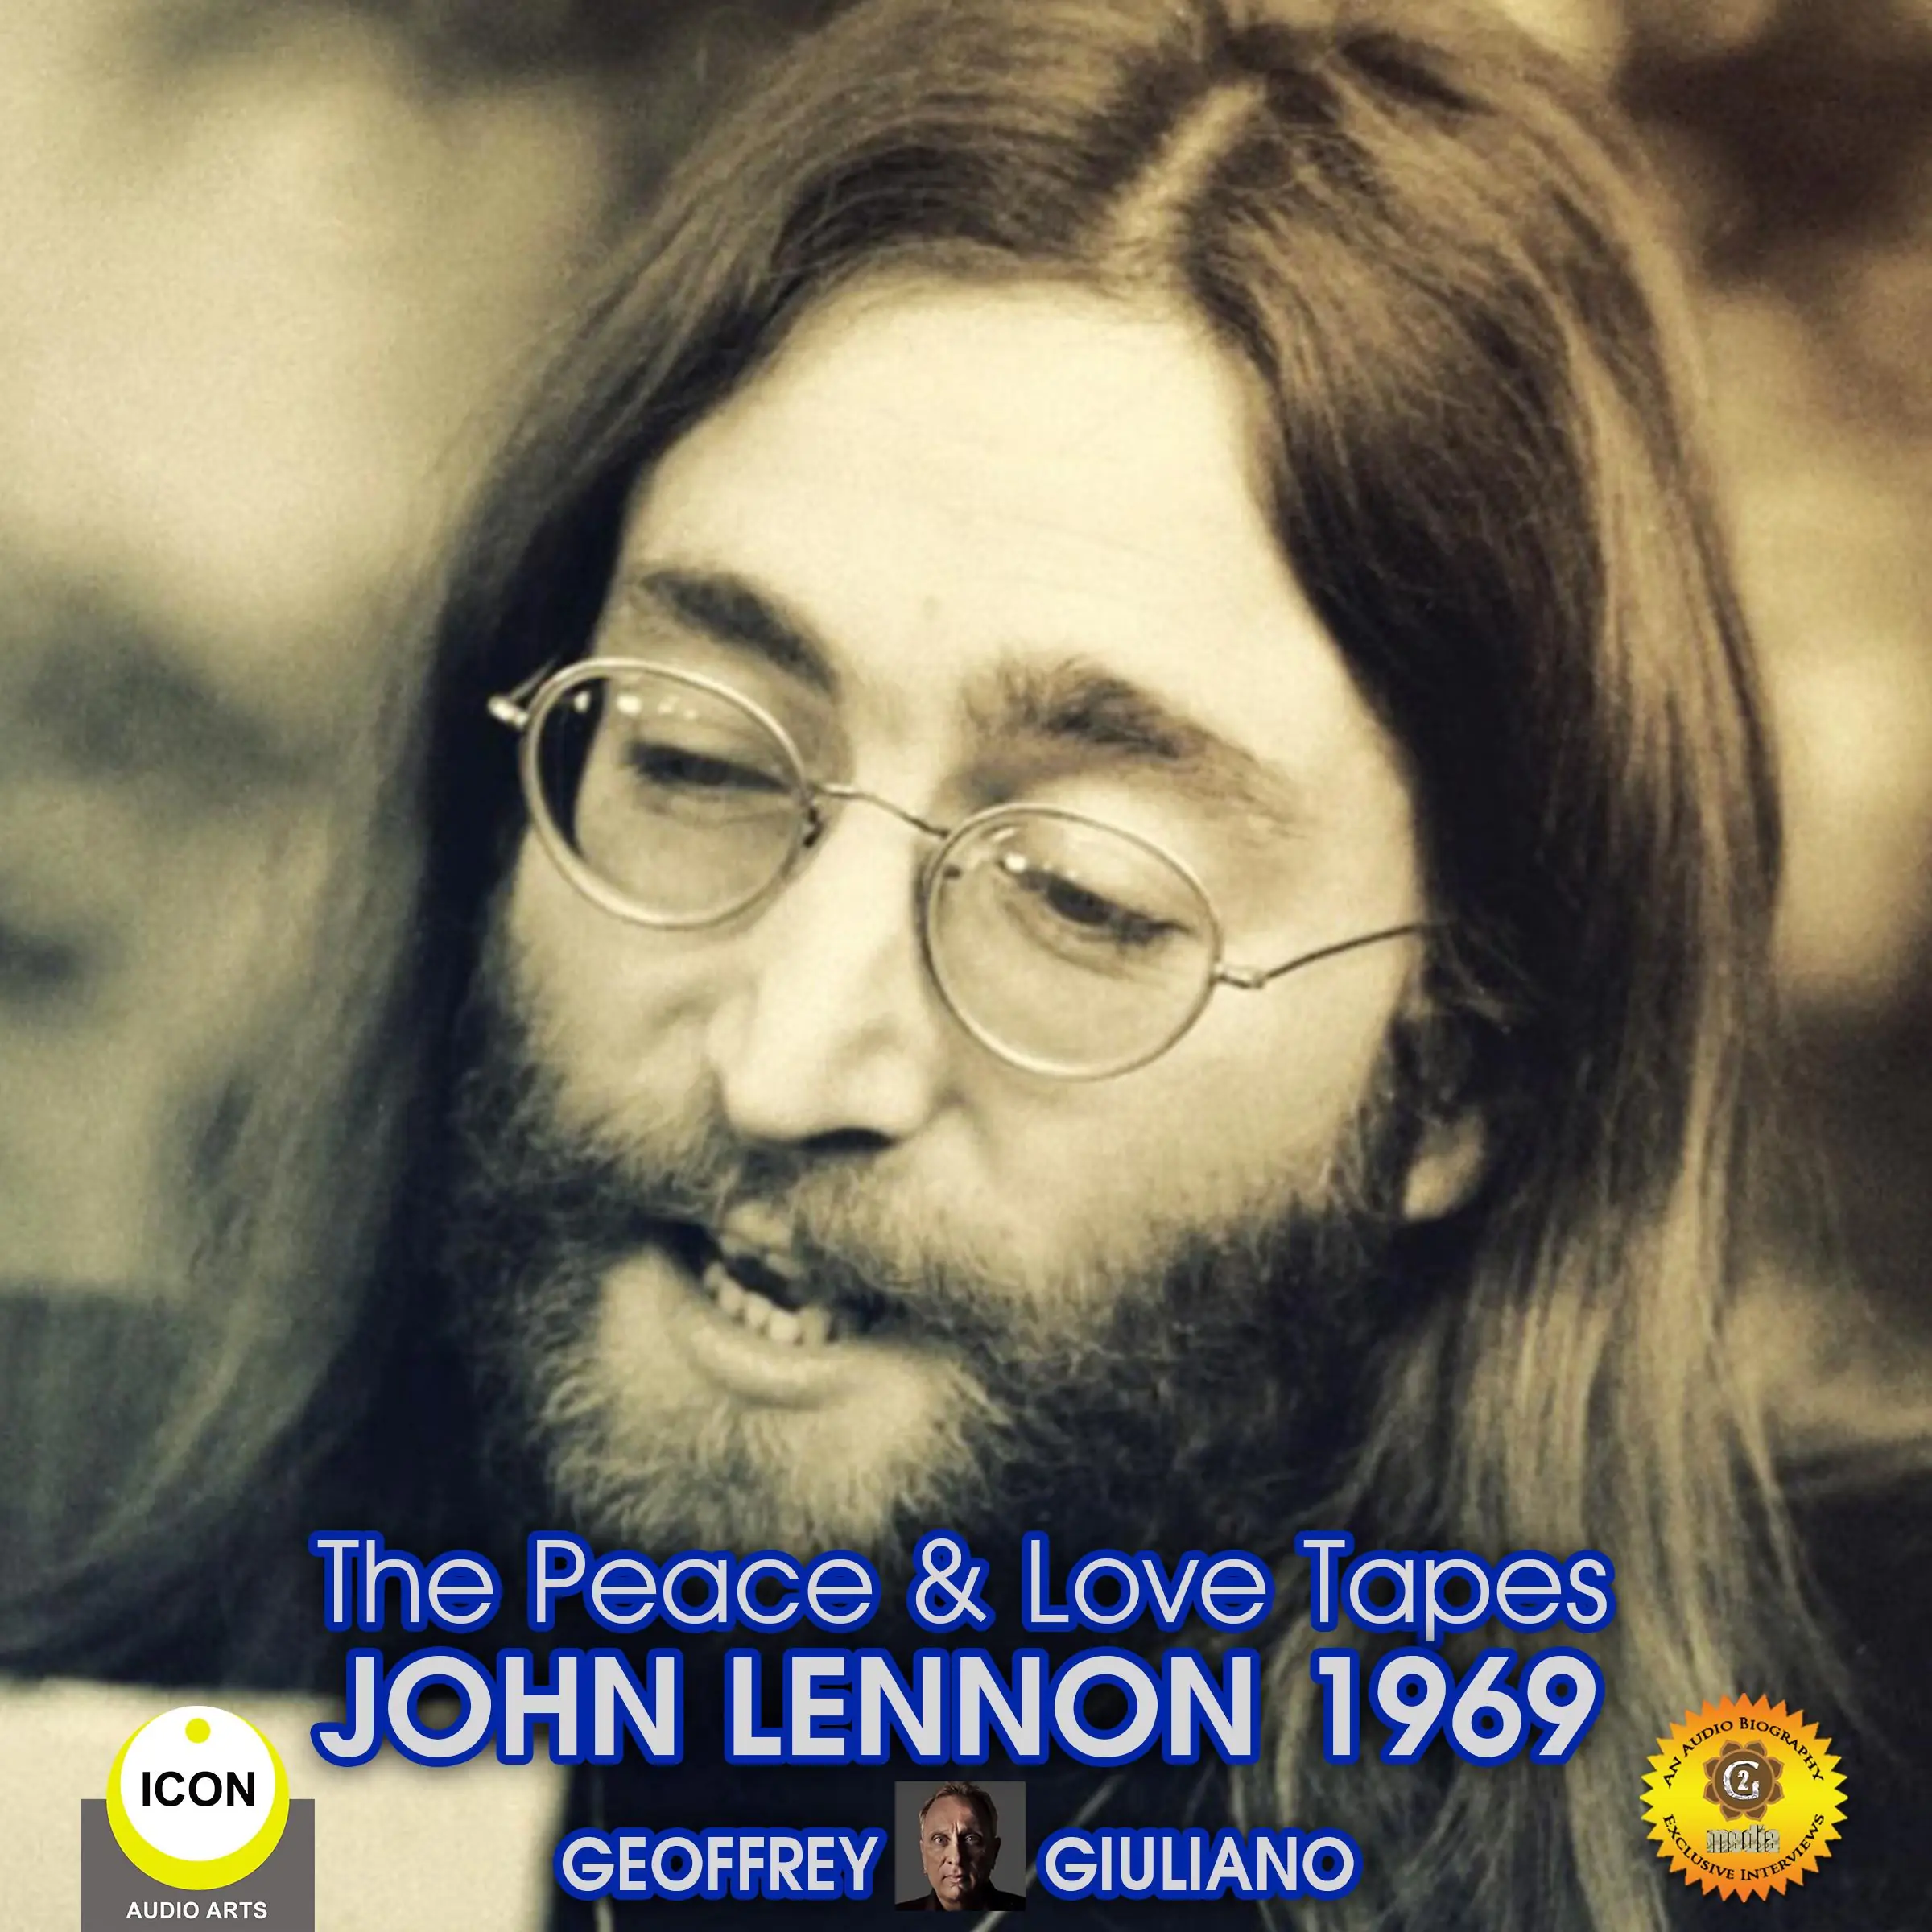 The Peace &amp; Love Tapes John Lennon 1969 by Geoffrey Giuliano Audiobook